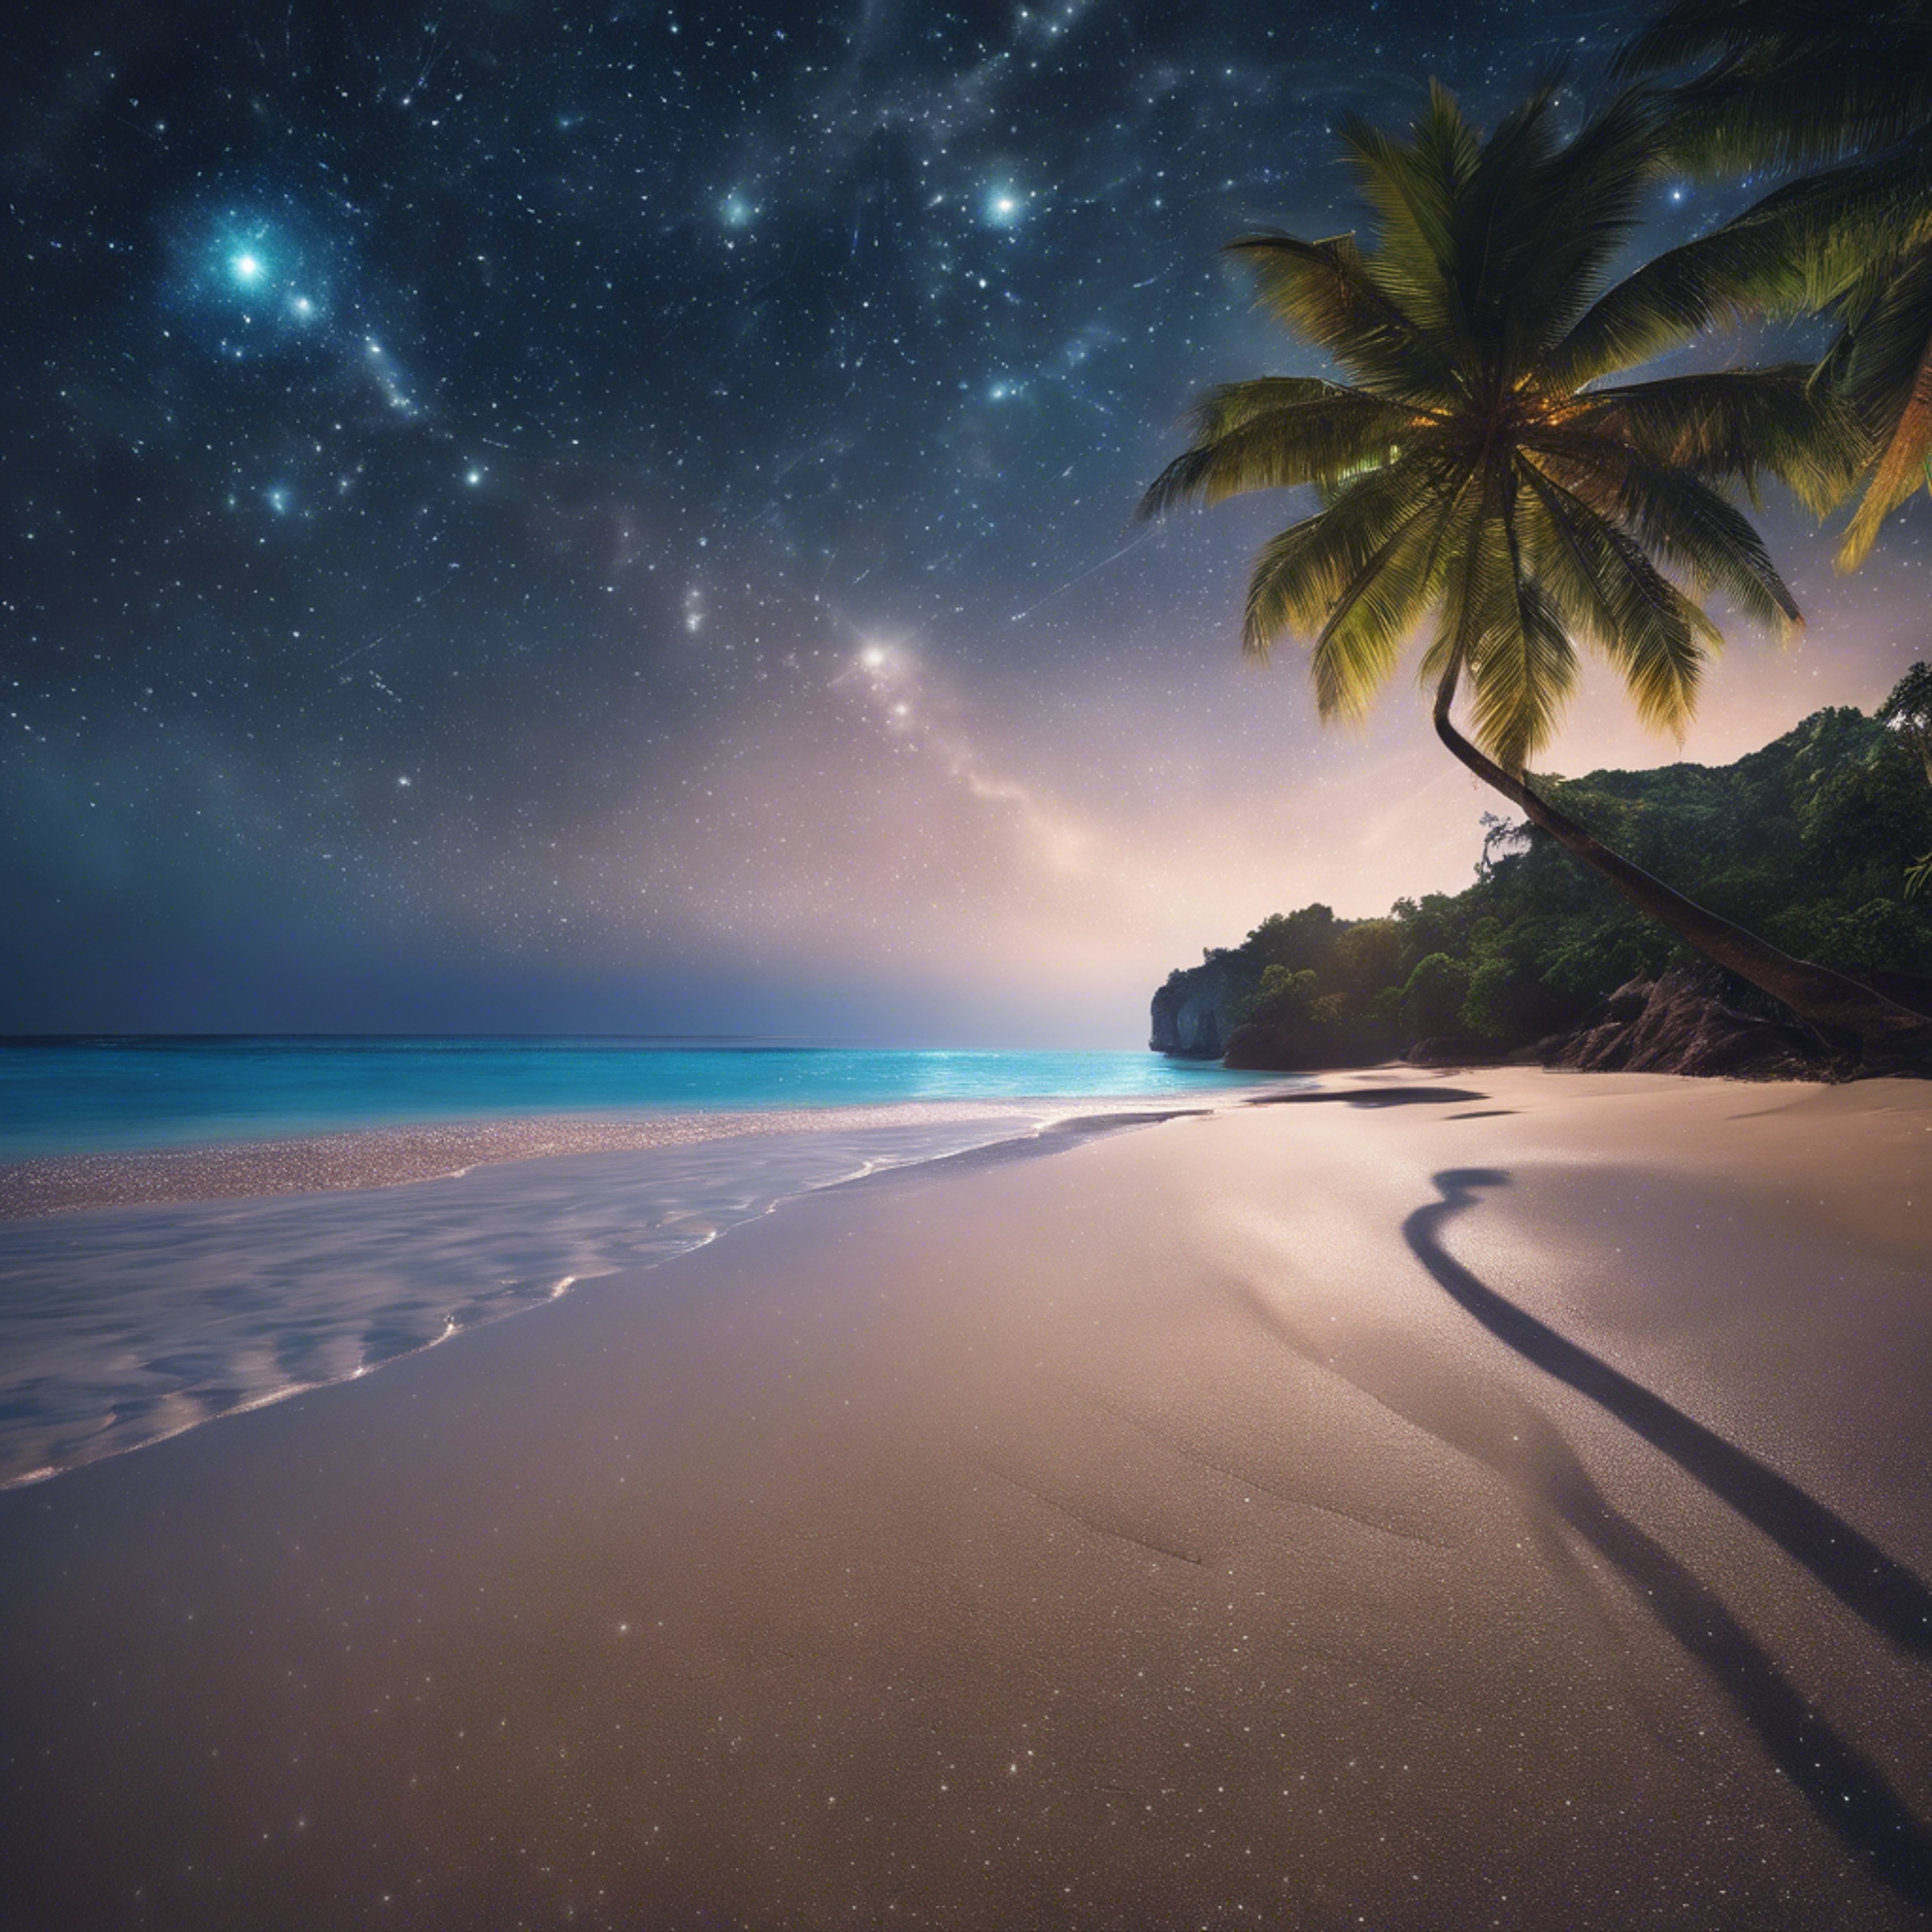 Gleaming stars encrusted in the night sky above a tranquil tropical beach. Валлпапер[e4d213f7e6244d2f8918]